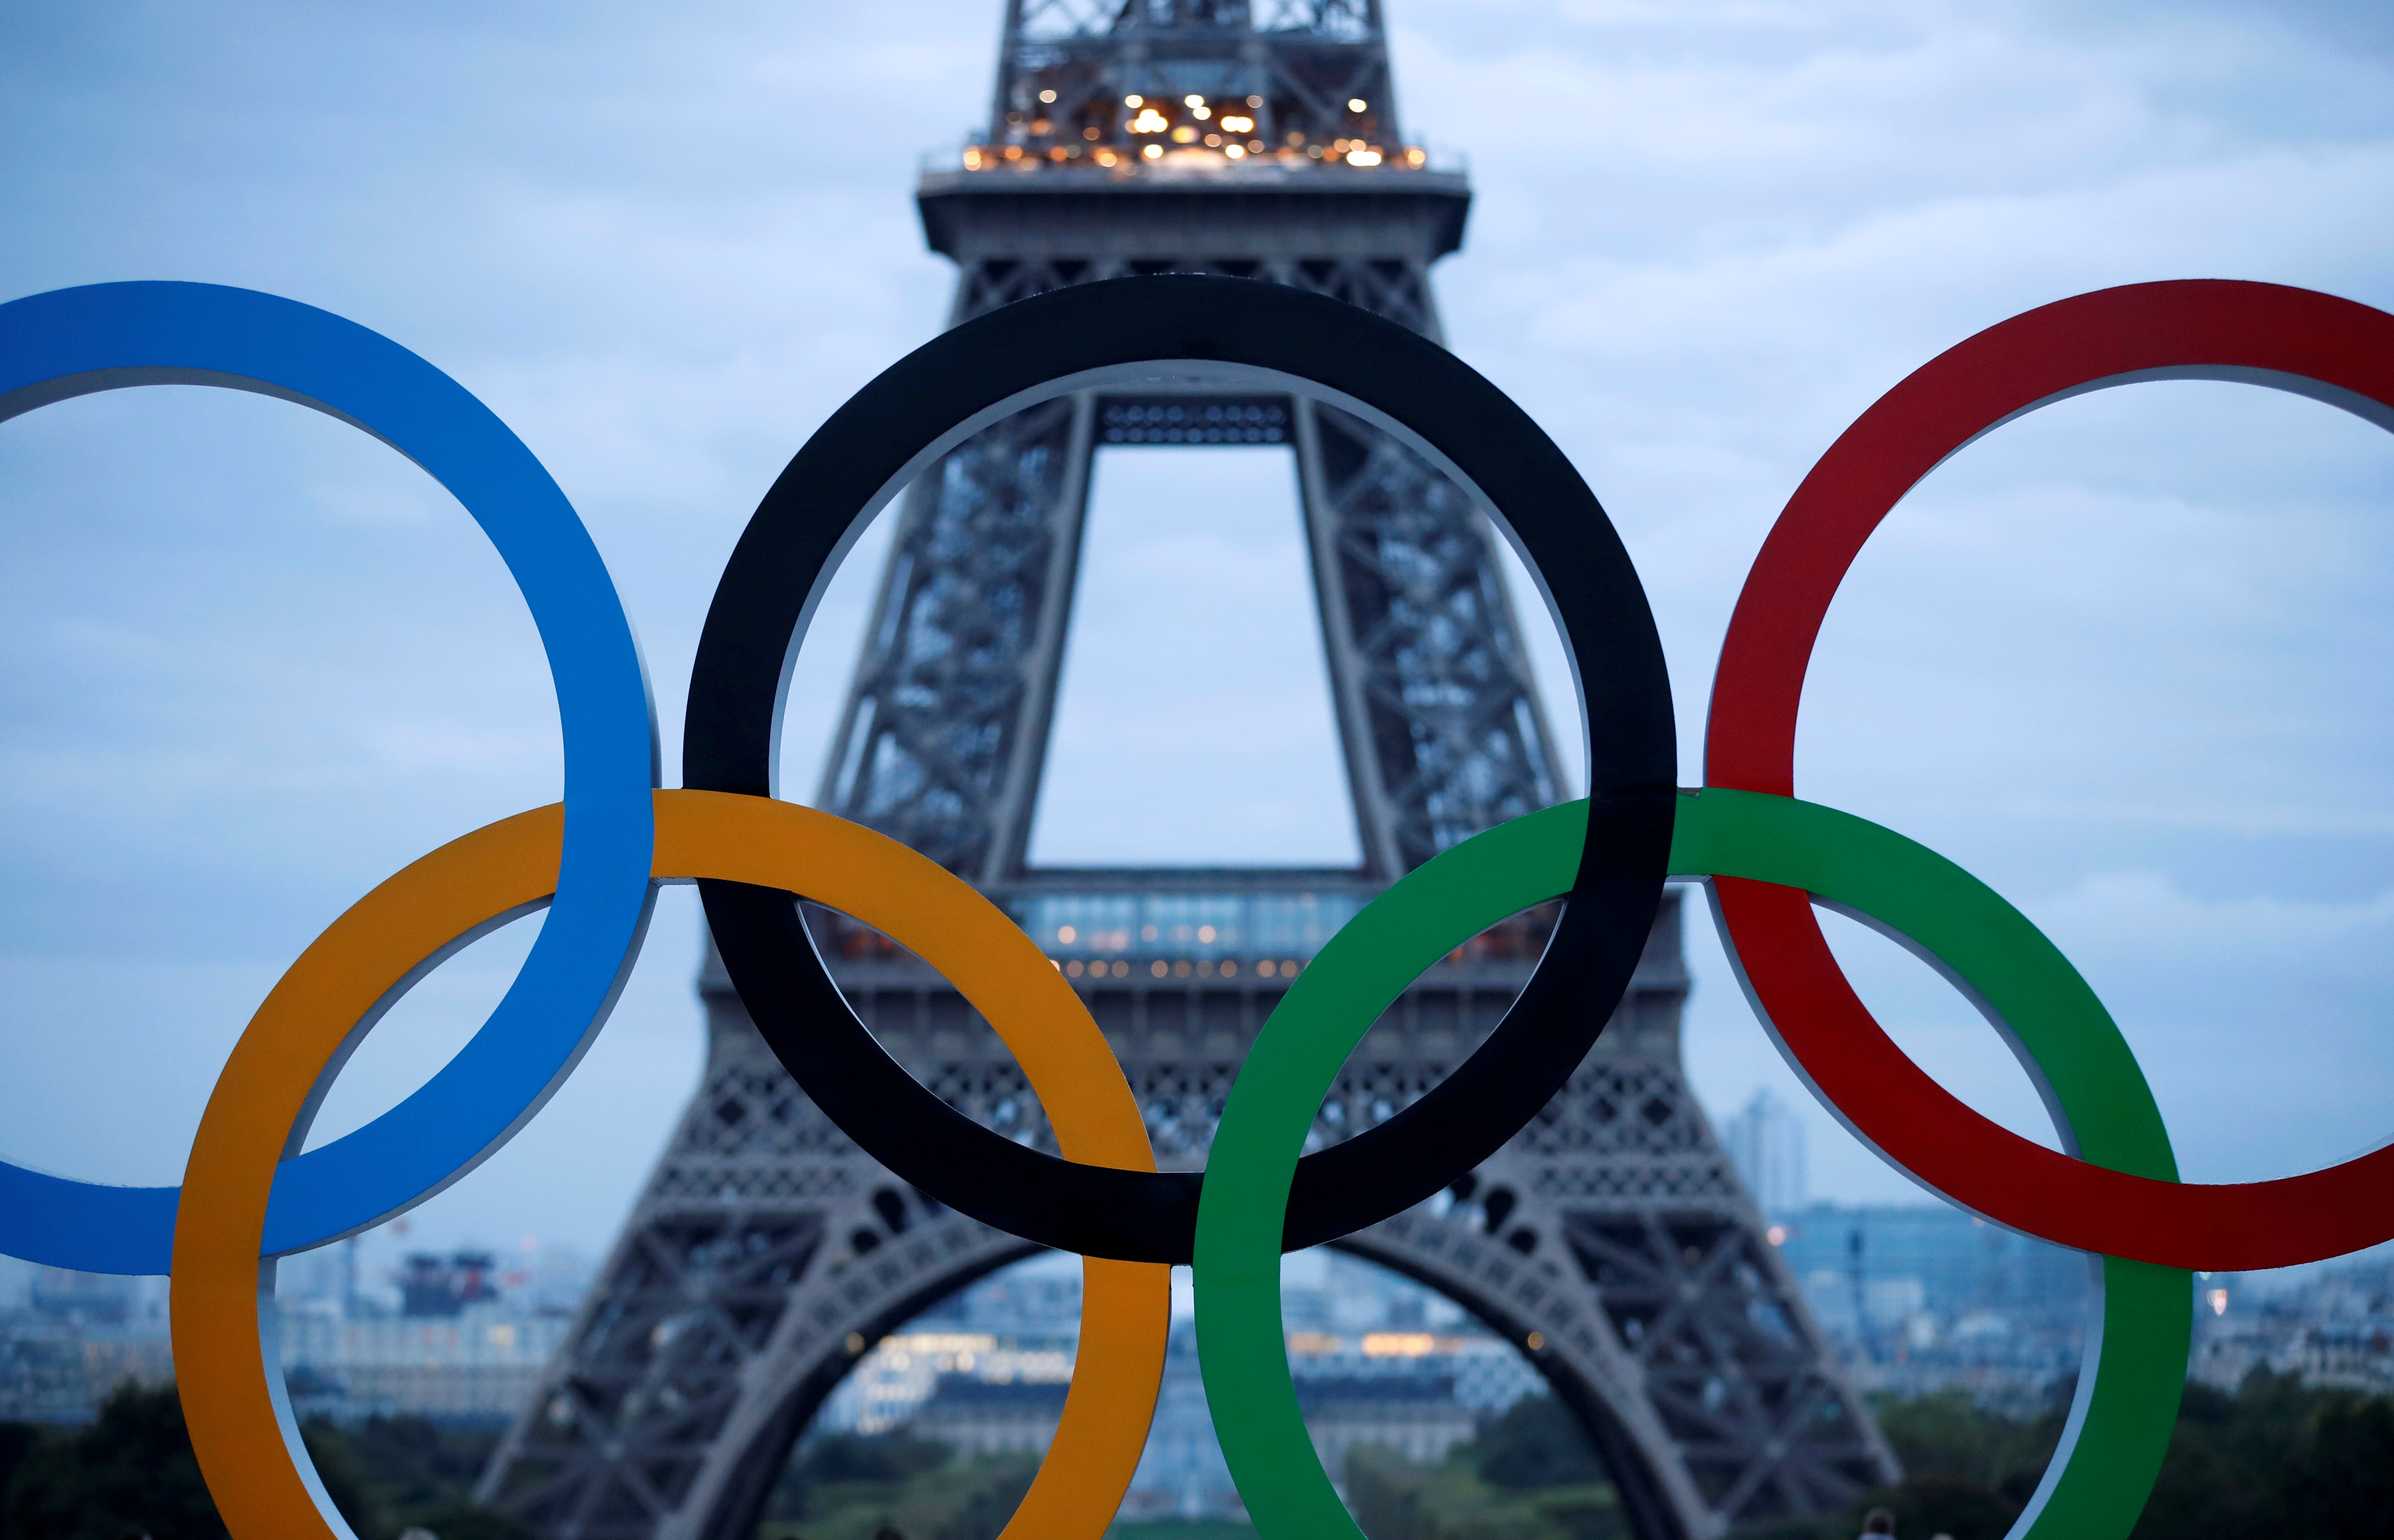 FILE PHOTO: Olympic rings to celebrate the IOC official announcement that Paris won the 2024 Olympic bid are seen in front of the Eiffel Tower at the Trocadero square in Paris, France, September 14, 2017.   REUTERS/Christian Hartmann/File Photo